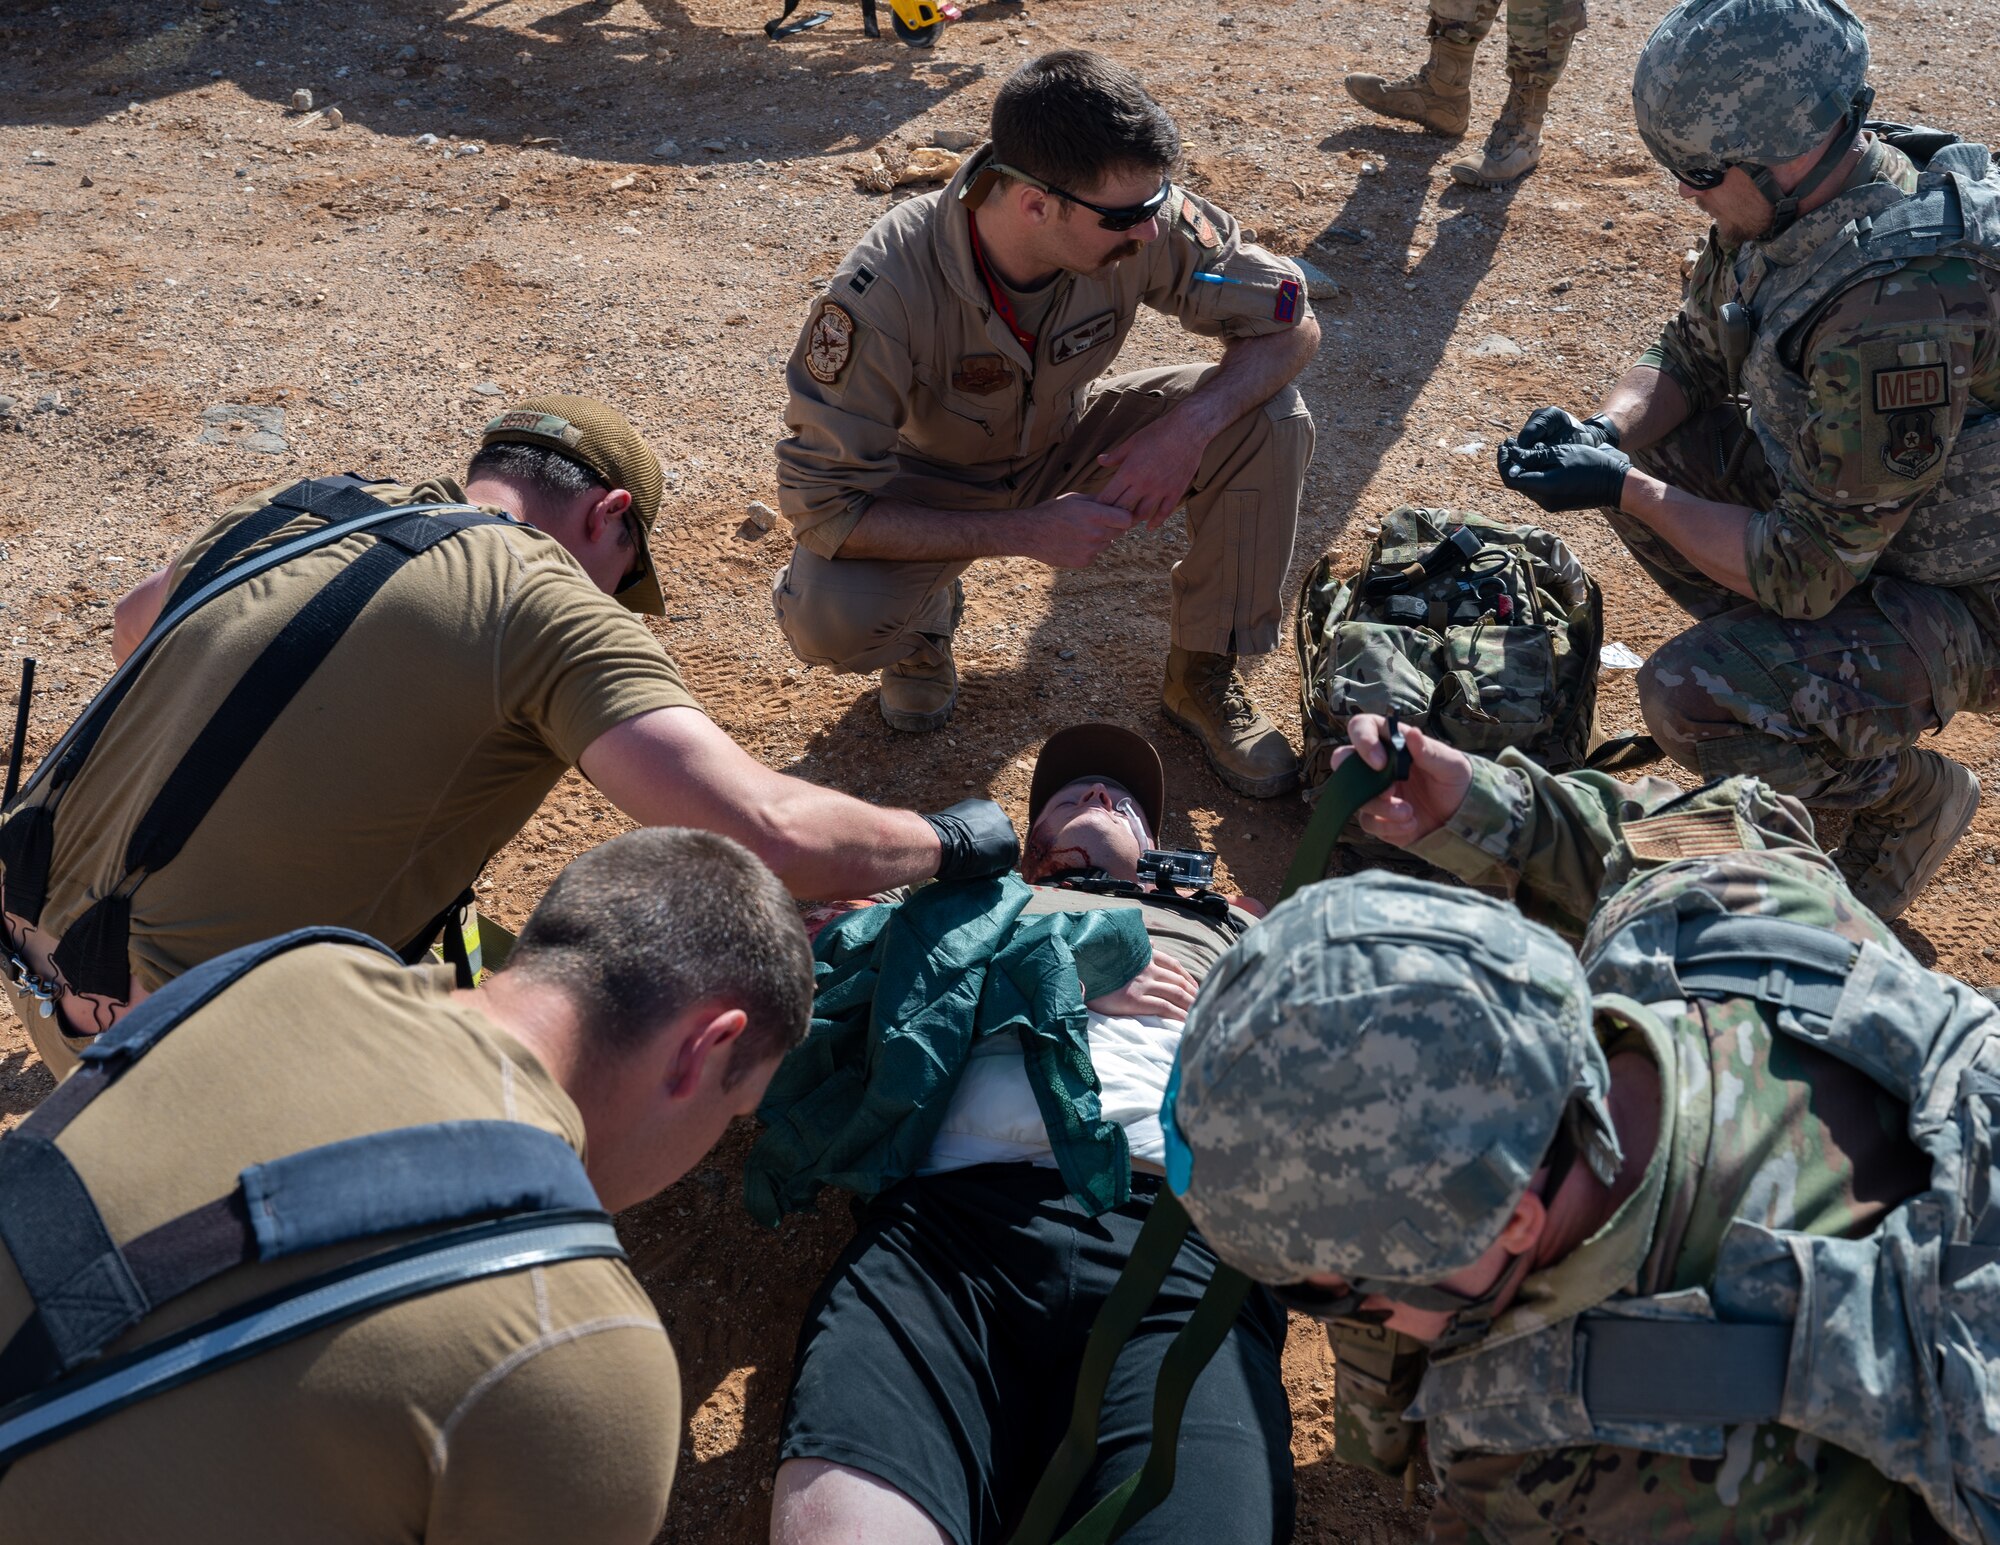 U.S. Air Force Airmen from the 332d Expeditionary Medical Squadron and 332d Civil Engineer Squadron apply tactical combat casualty care skills to a simulated injured patient at an undisclosed location in Southwest Asia March 13, 2023.